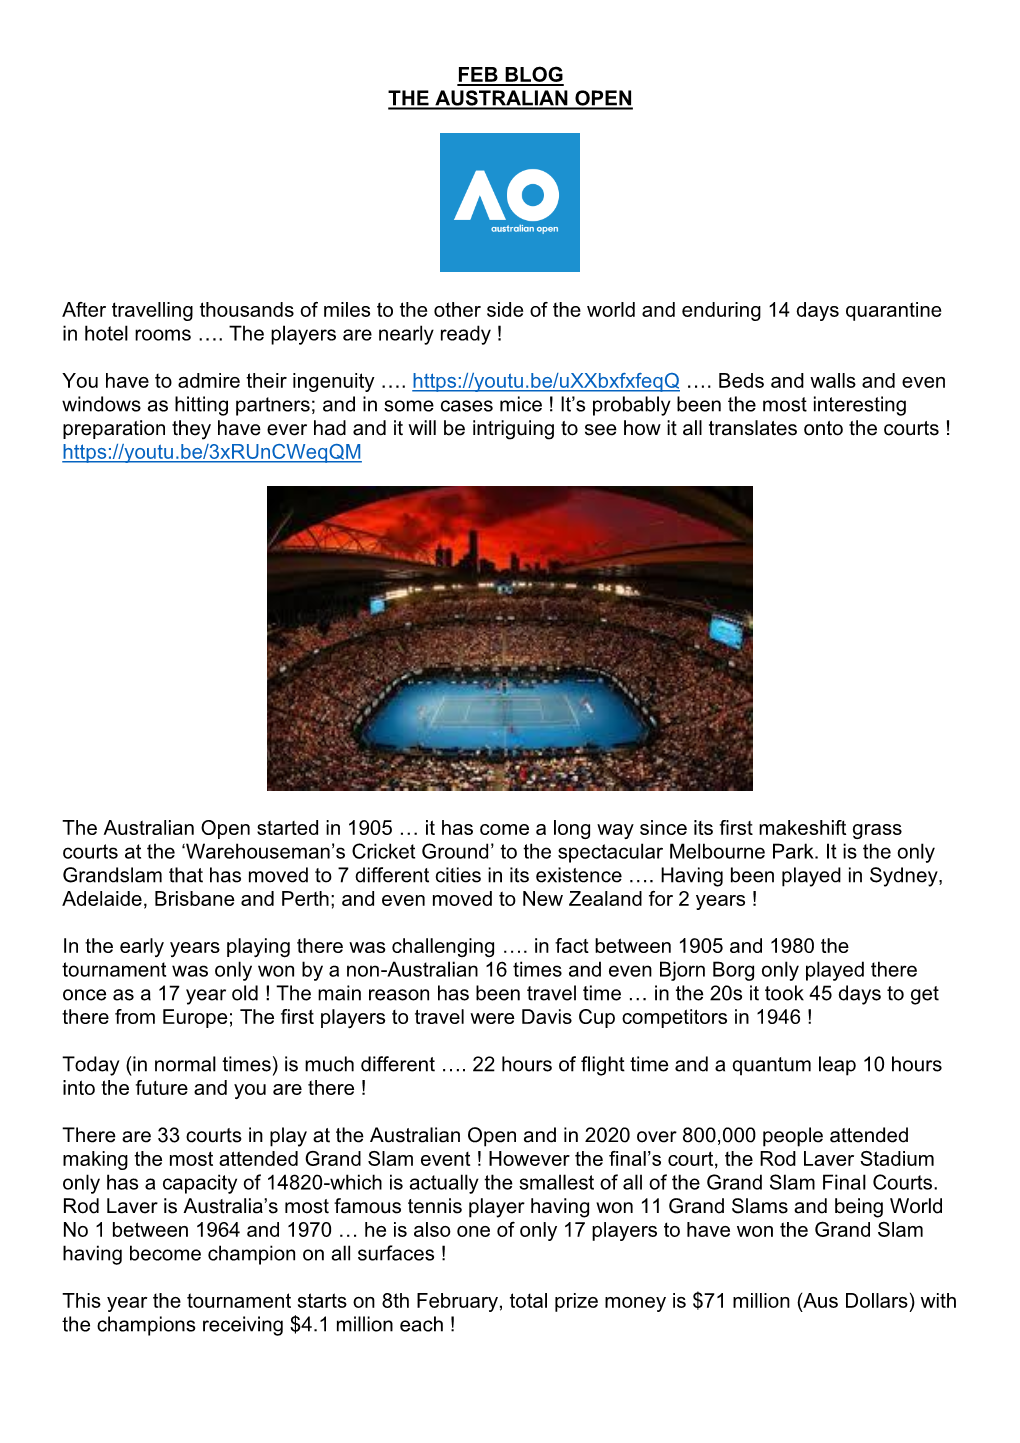 FEB BLOG the AUSTRALIAN OPEN After Travelling Thousands of Miles